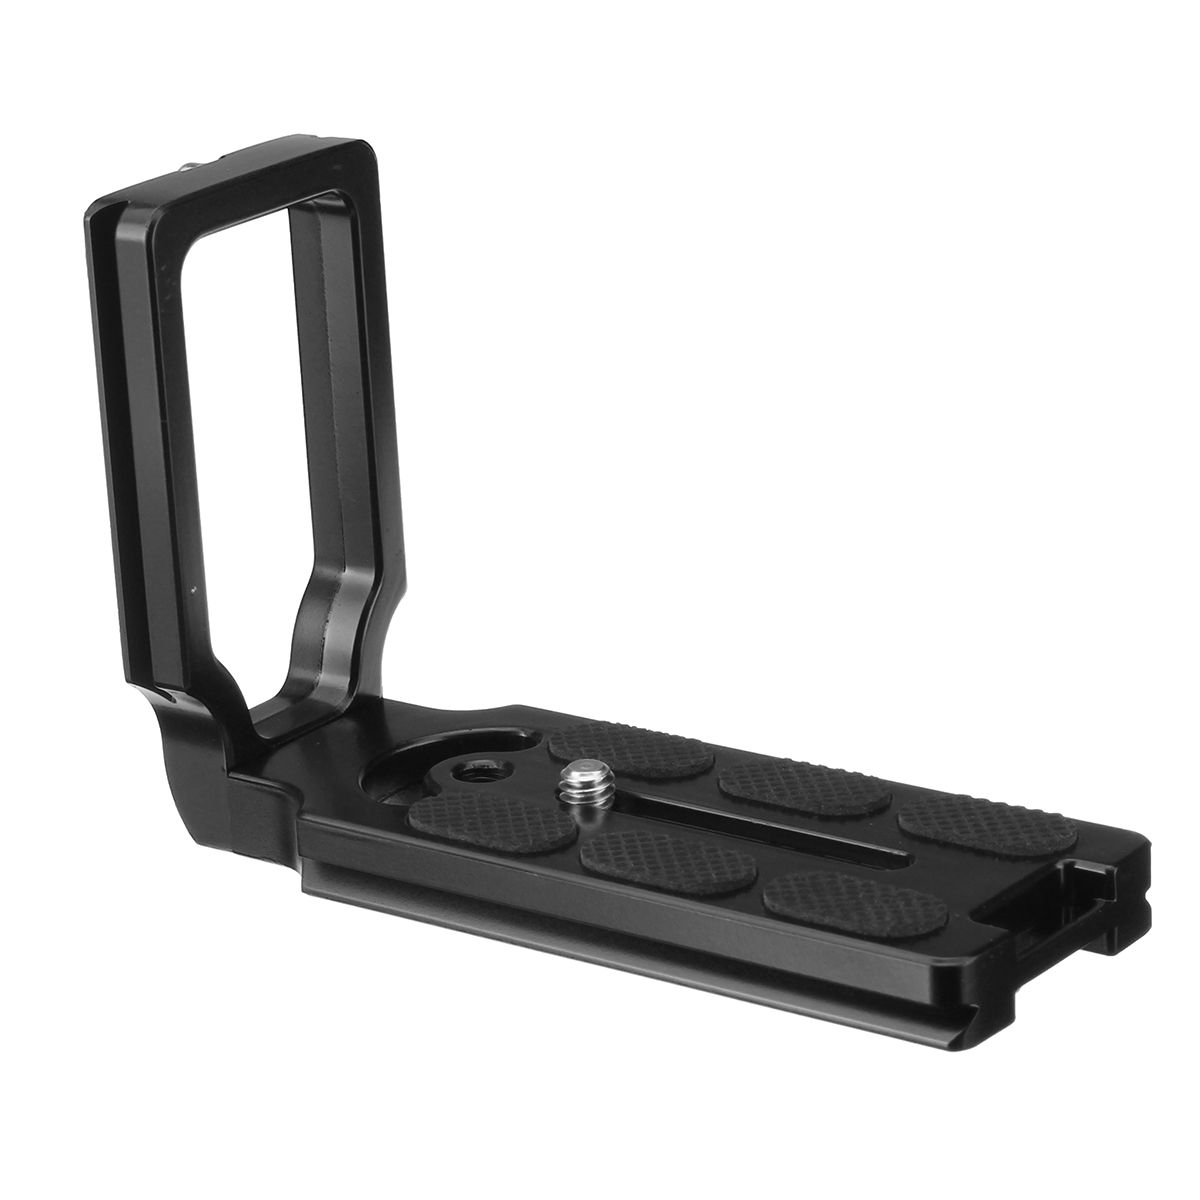 MPU-105-L-Shape-Quick-Release-Plate-Bracket-for-Canon-for-Nikon-All-Cameras-with-One-quarter-Screw-1263991